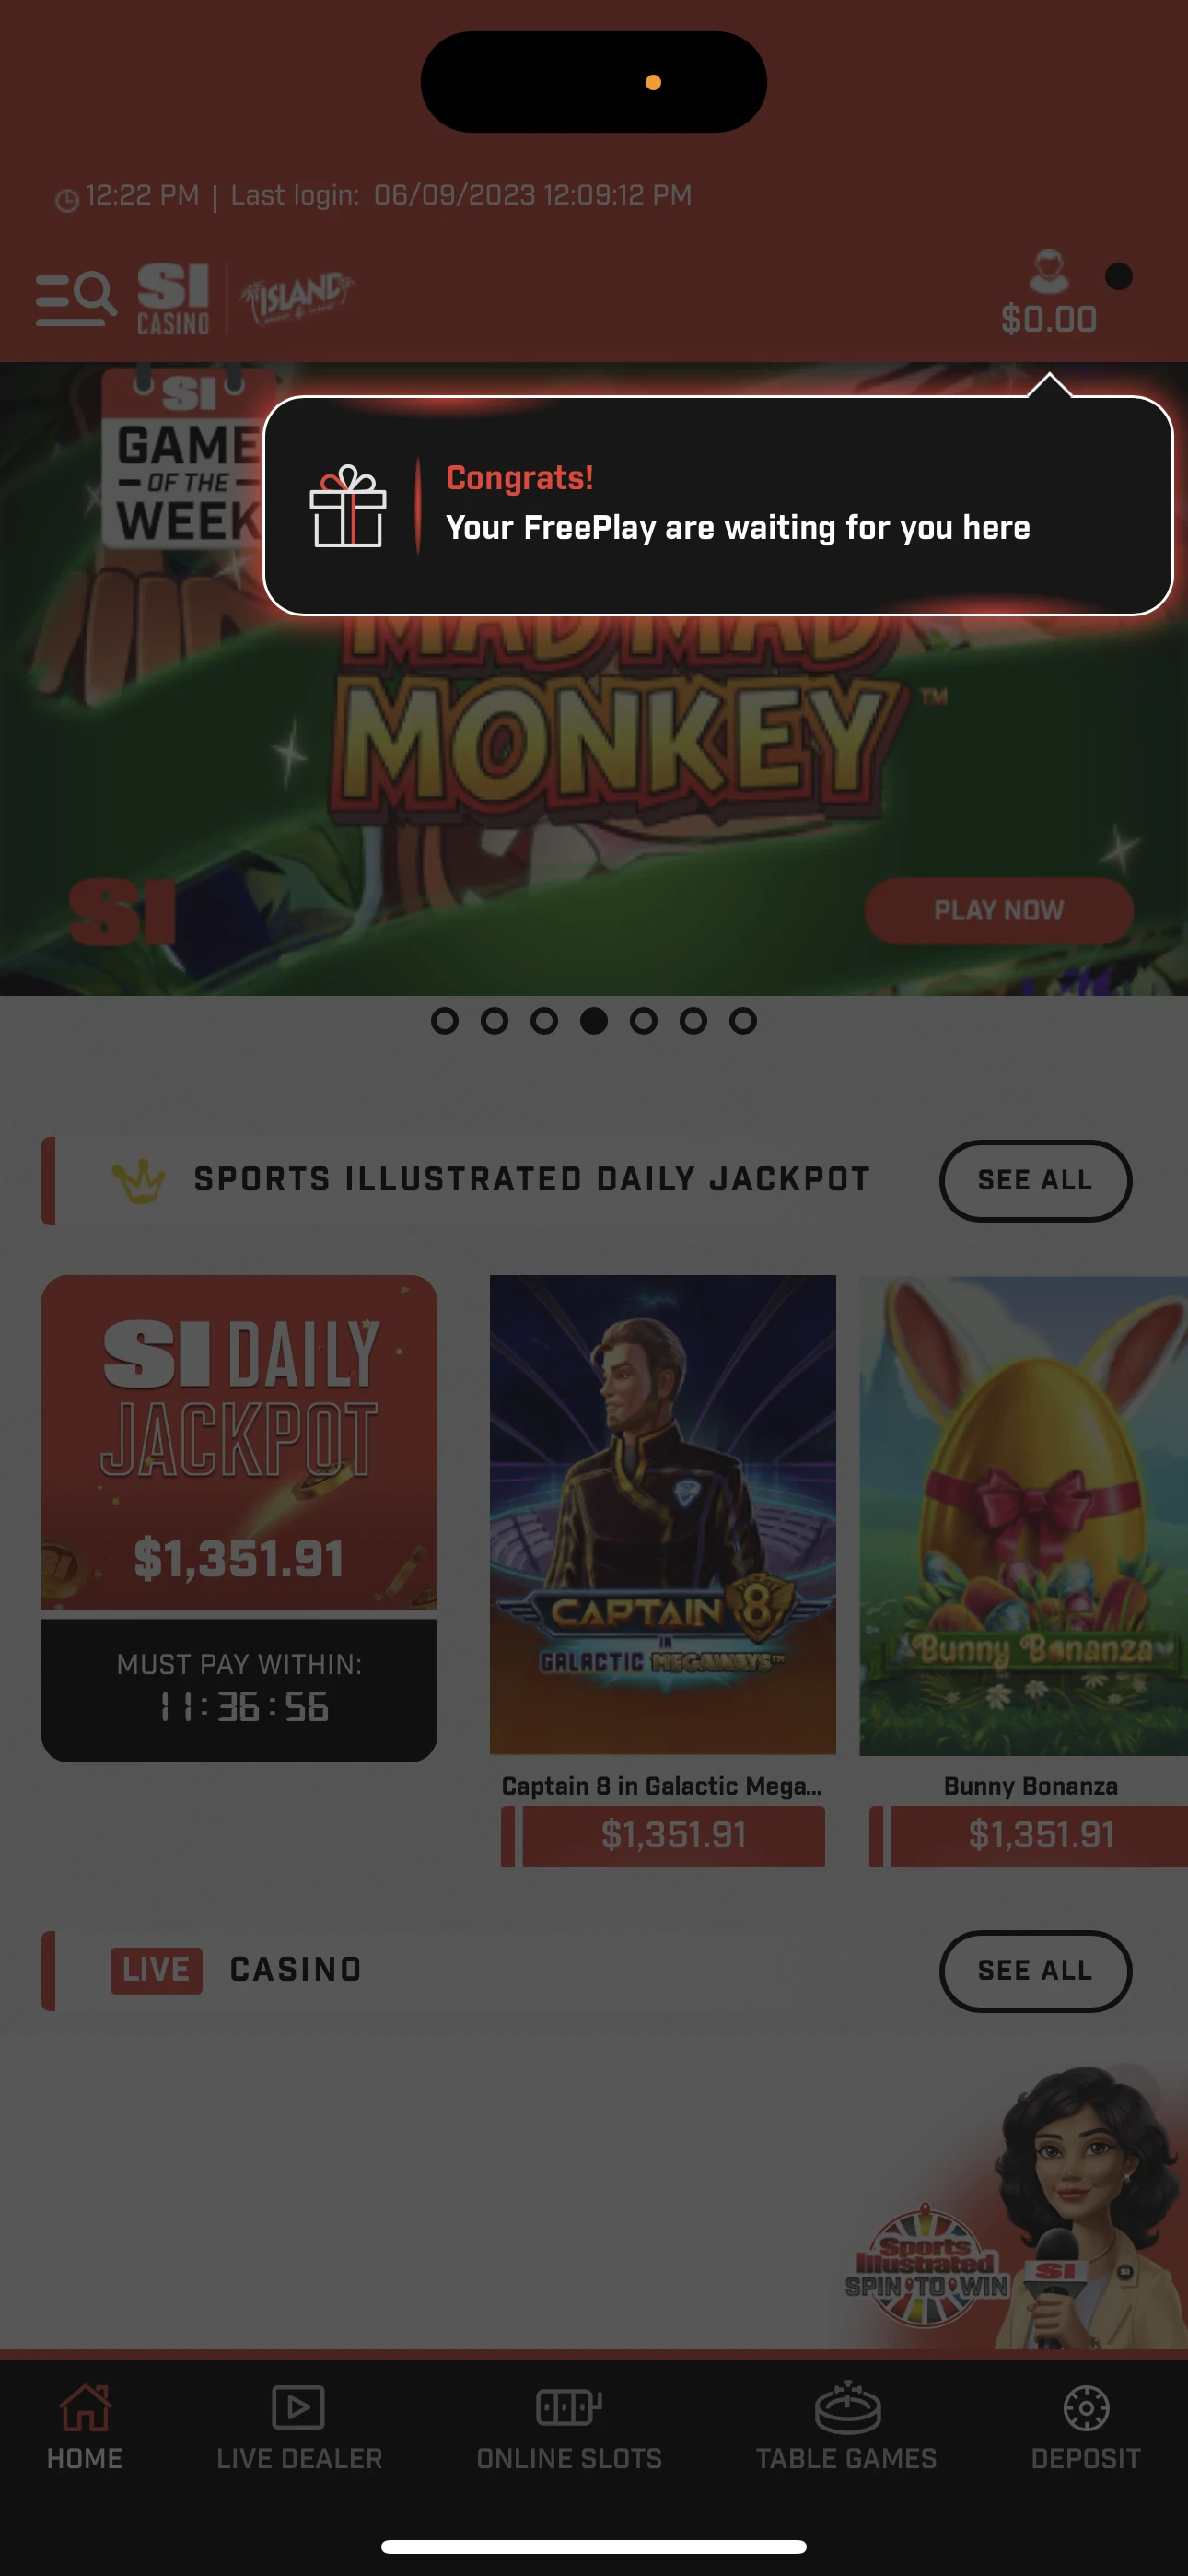 Sign Up to SI Casino Mobile App & Use Free Play Balance to Play Interesting Illustrated Games.